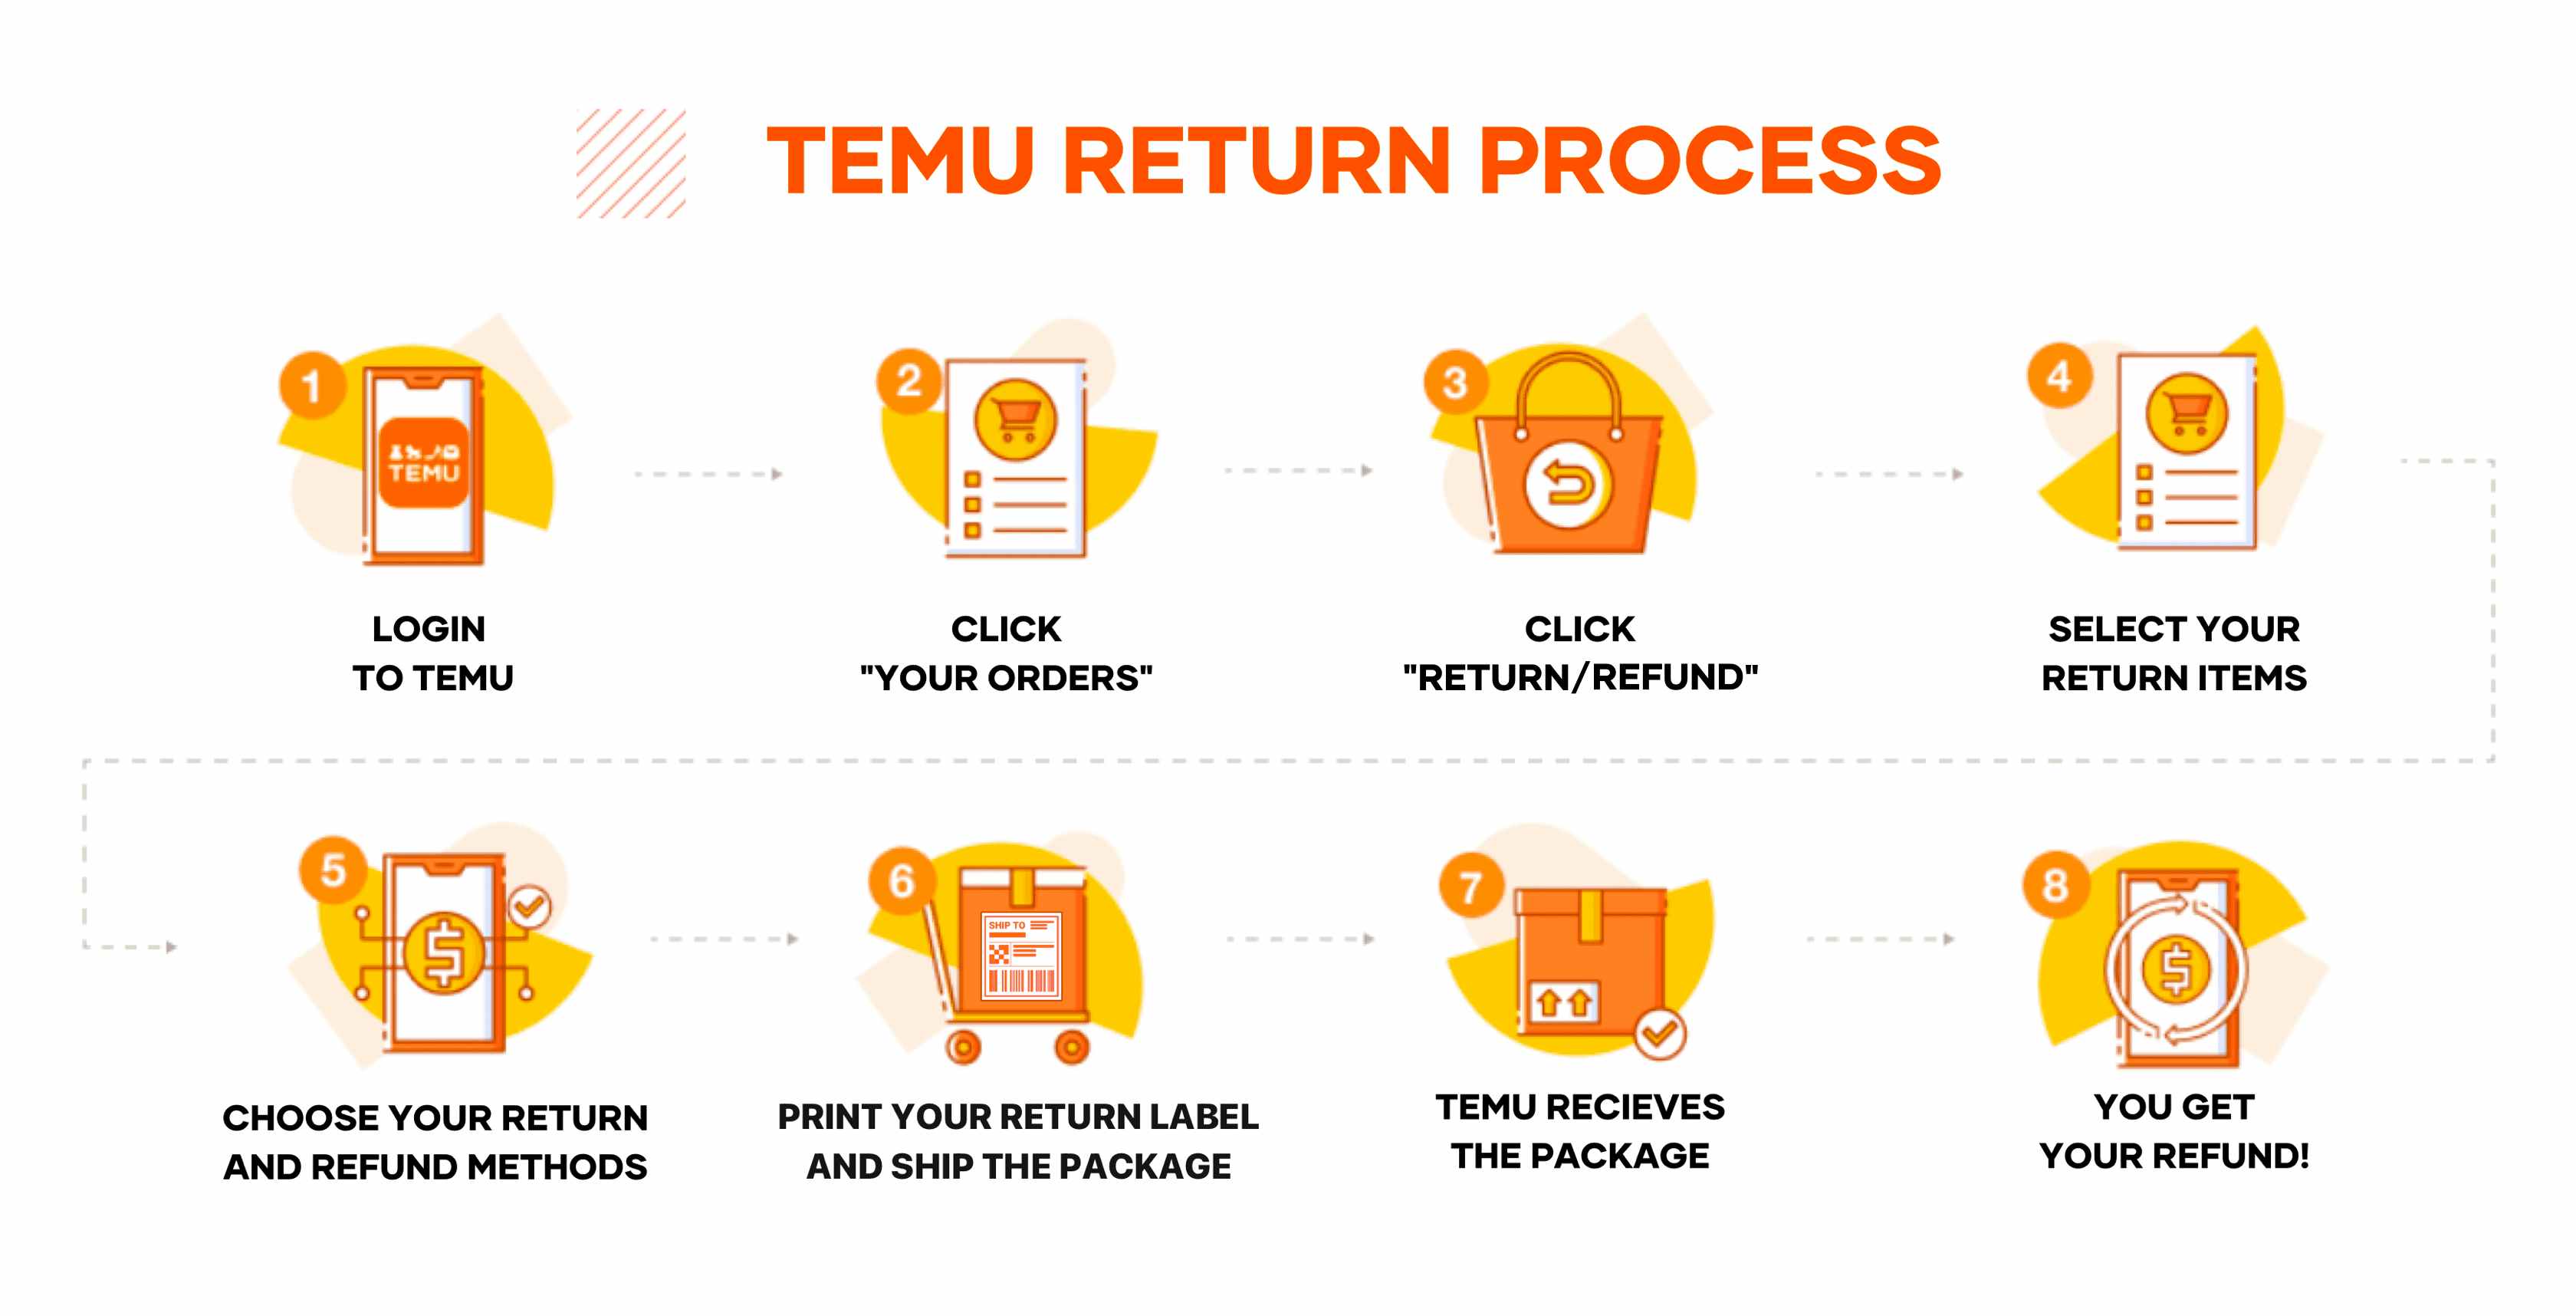 A graphic showing the steps how to make a return on Temu